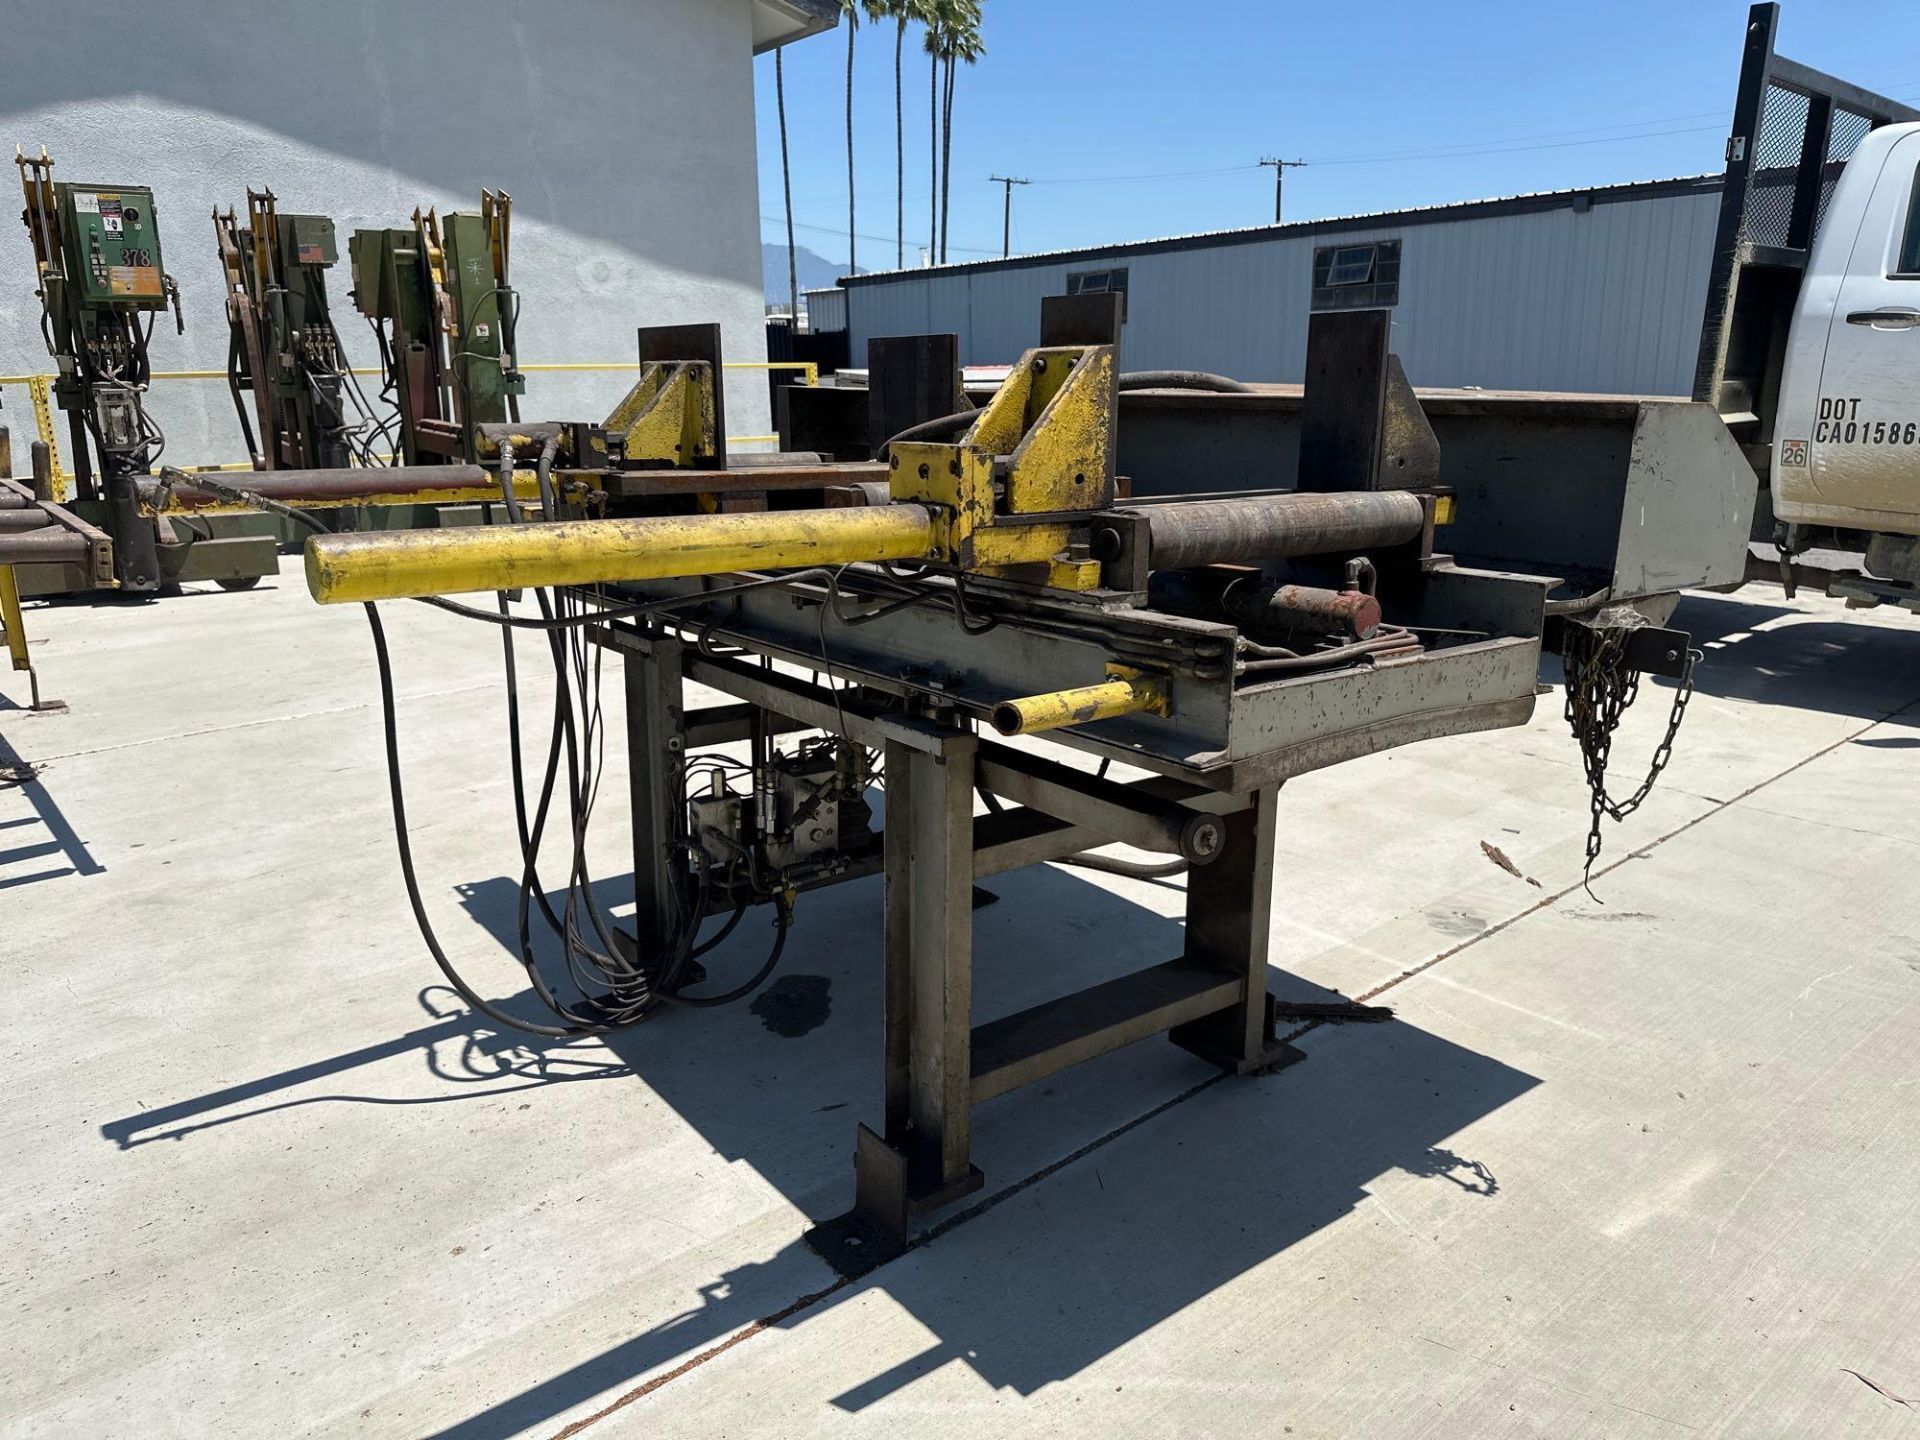 Marvel Series 2150A-PC60 Tilt Frame Vertical Band Saw, 2’ x 7’ Conveyor *Located in Redlands, CA* - Image 22 of 25